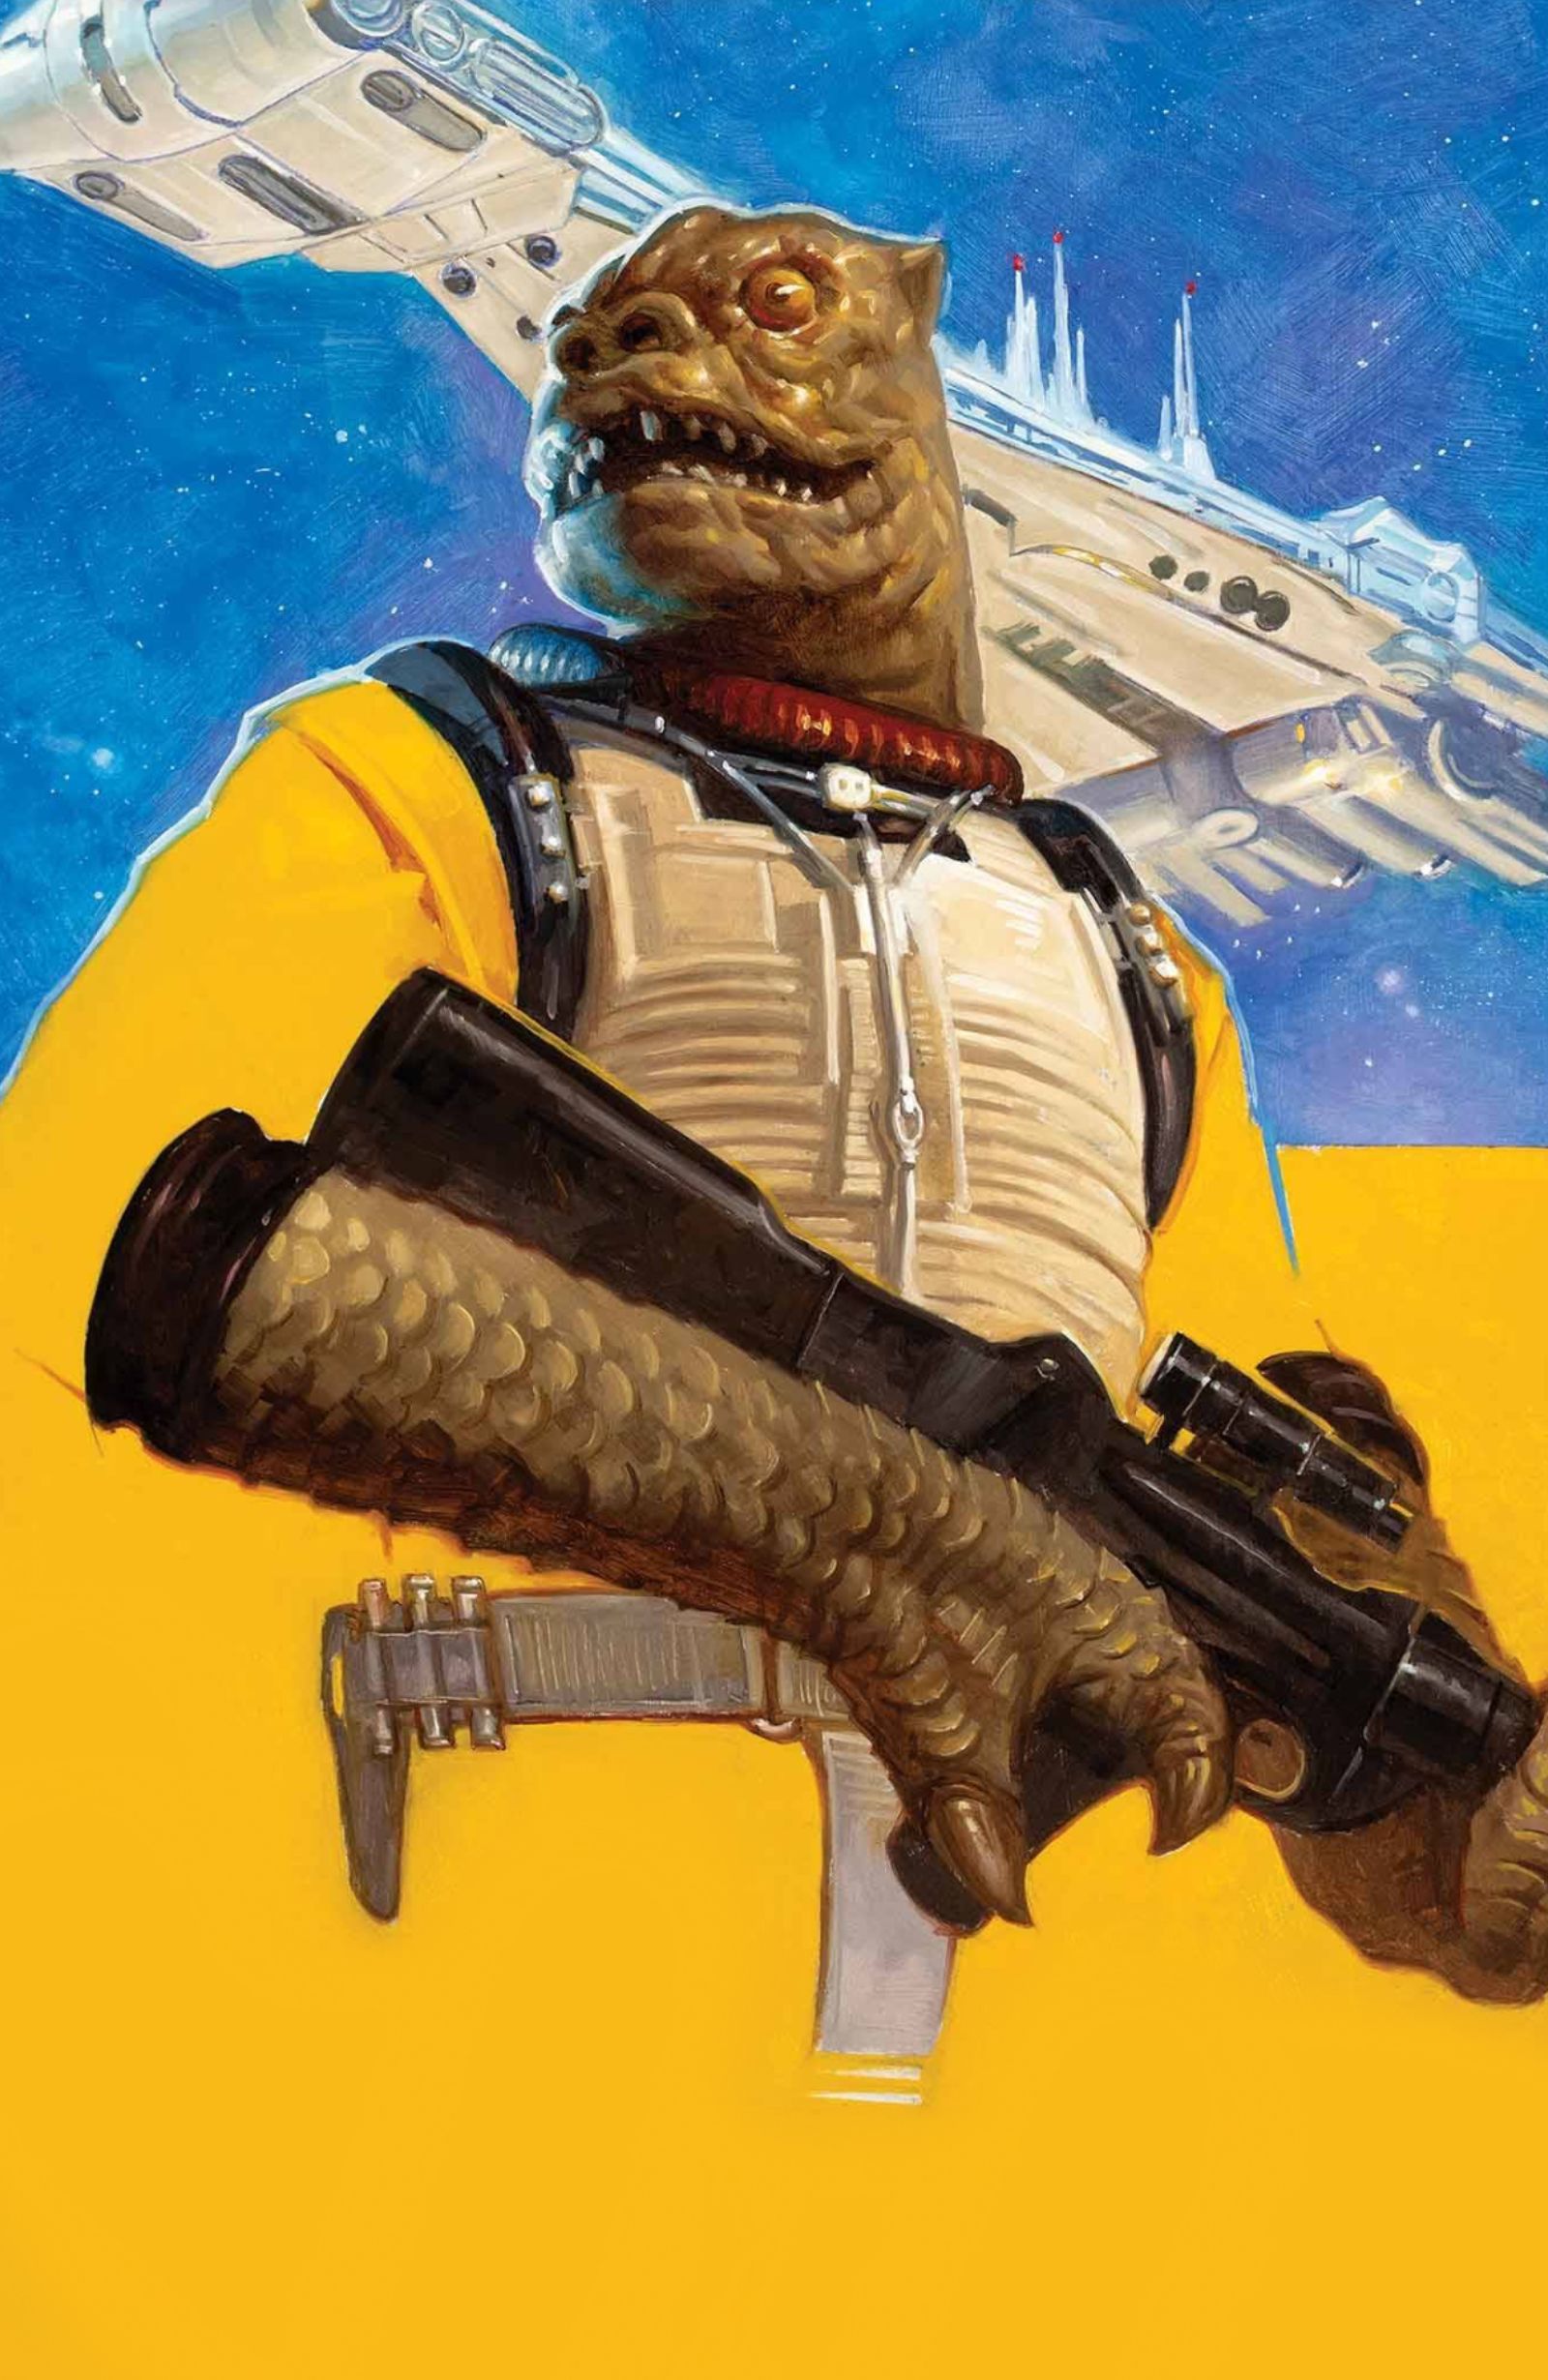 Bossk is still alive in canon.